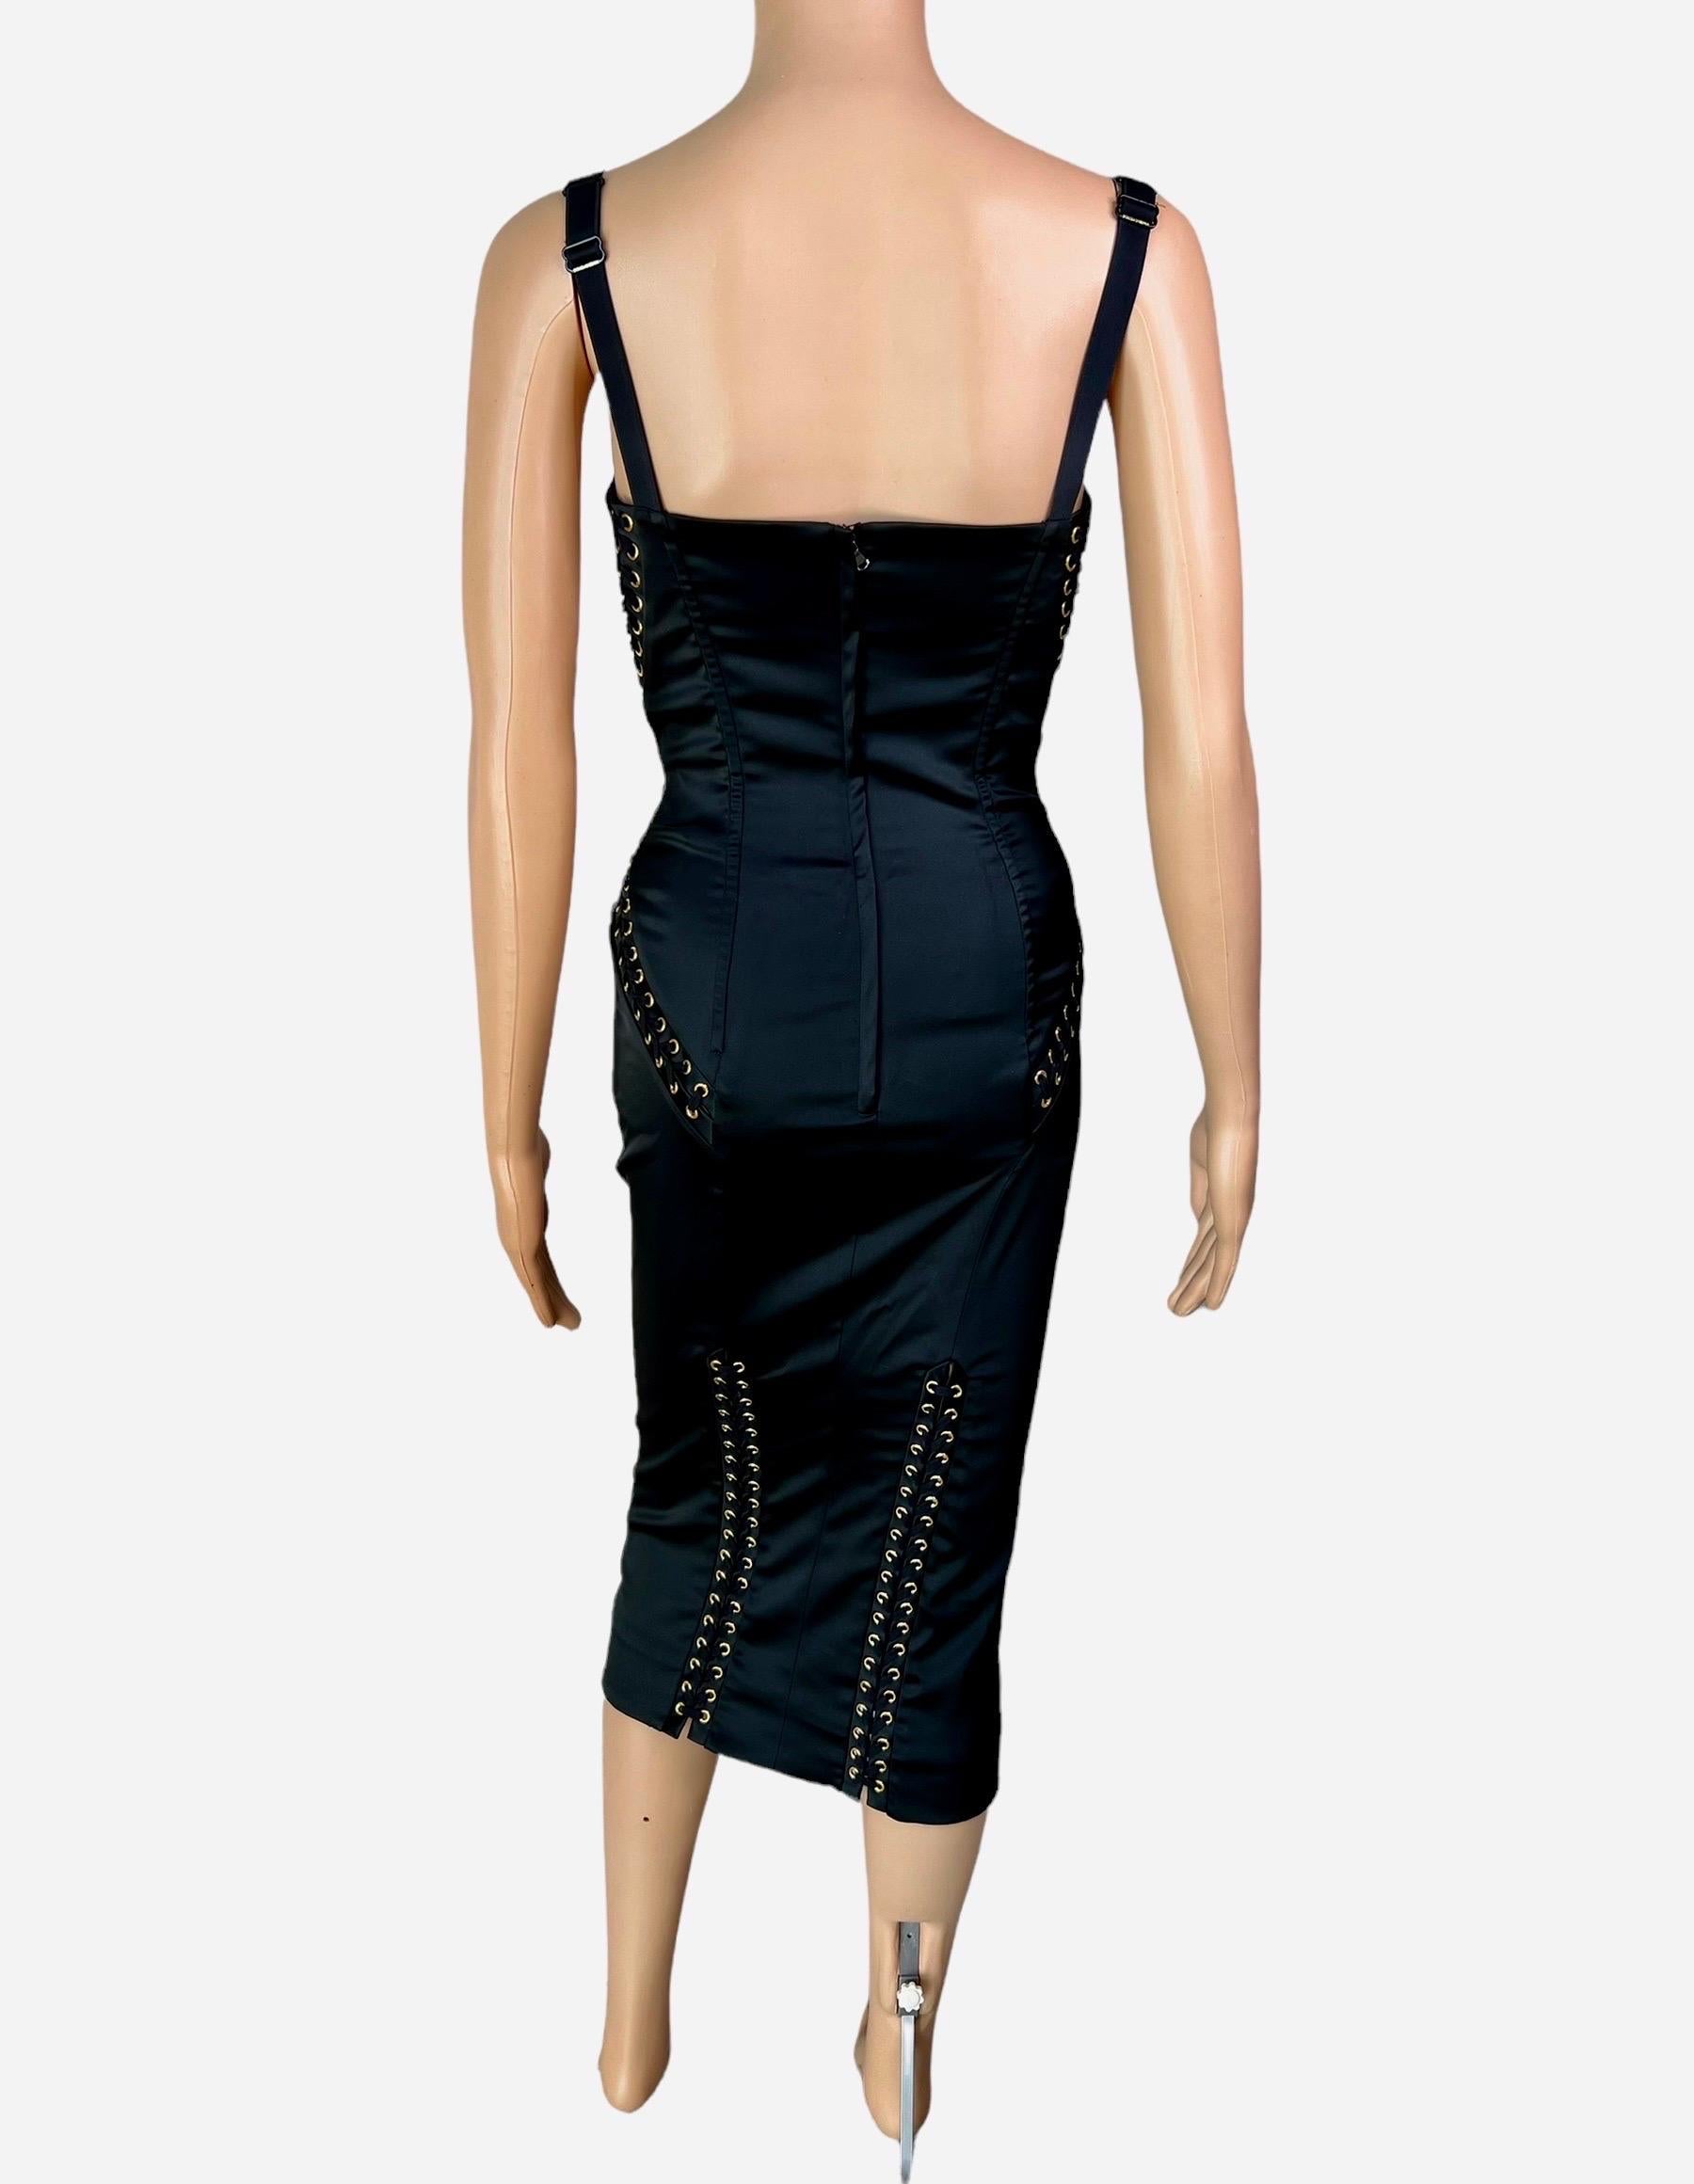 Dolce & Gabbana Corset Lace-Up Bustier Bodycon Black Midi Dress In Good Condition For Sale In Naples, FL